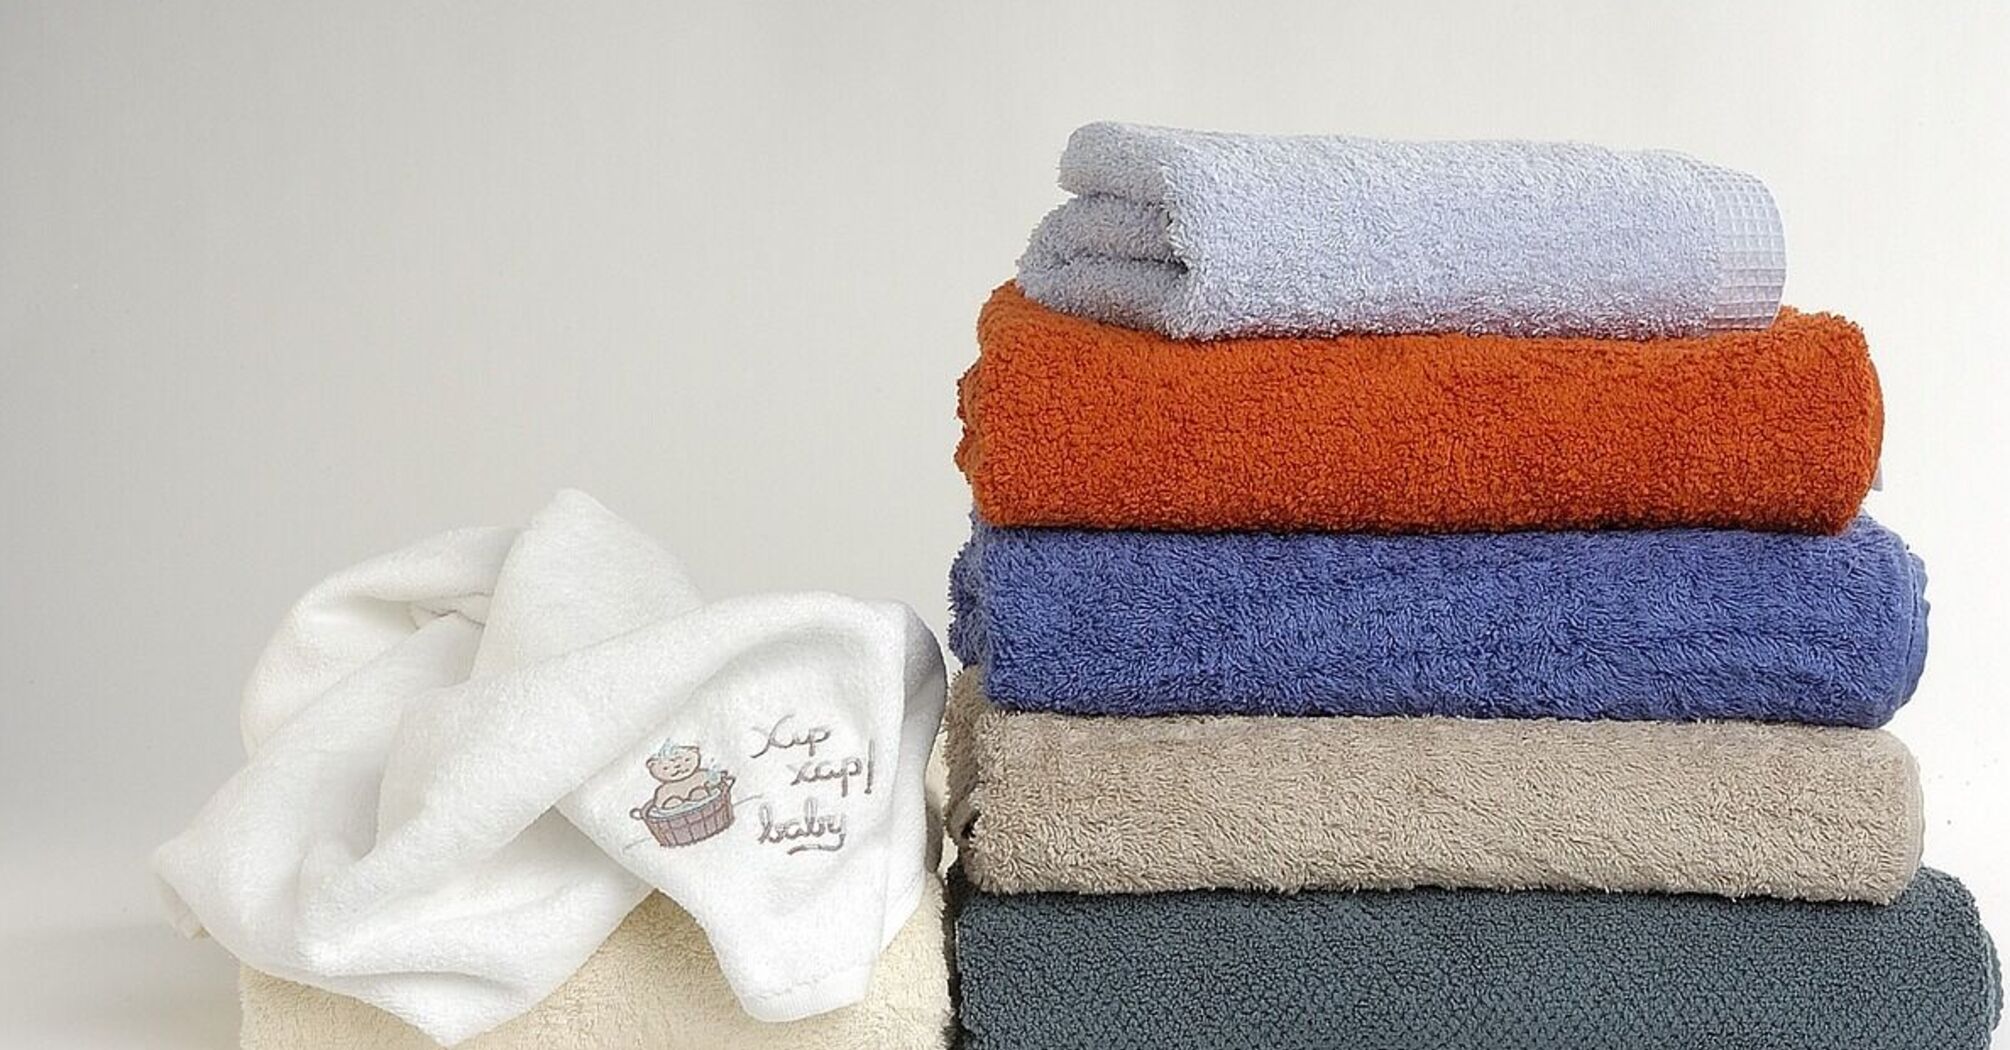 Forget about hard towels: a life hack to make them fluffy again